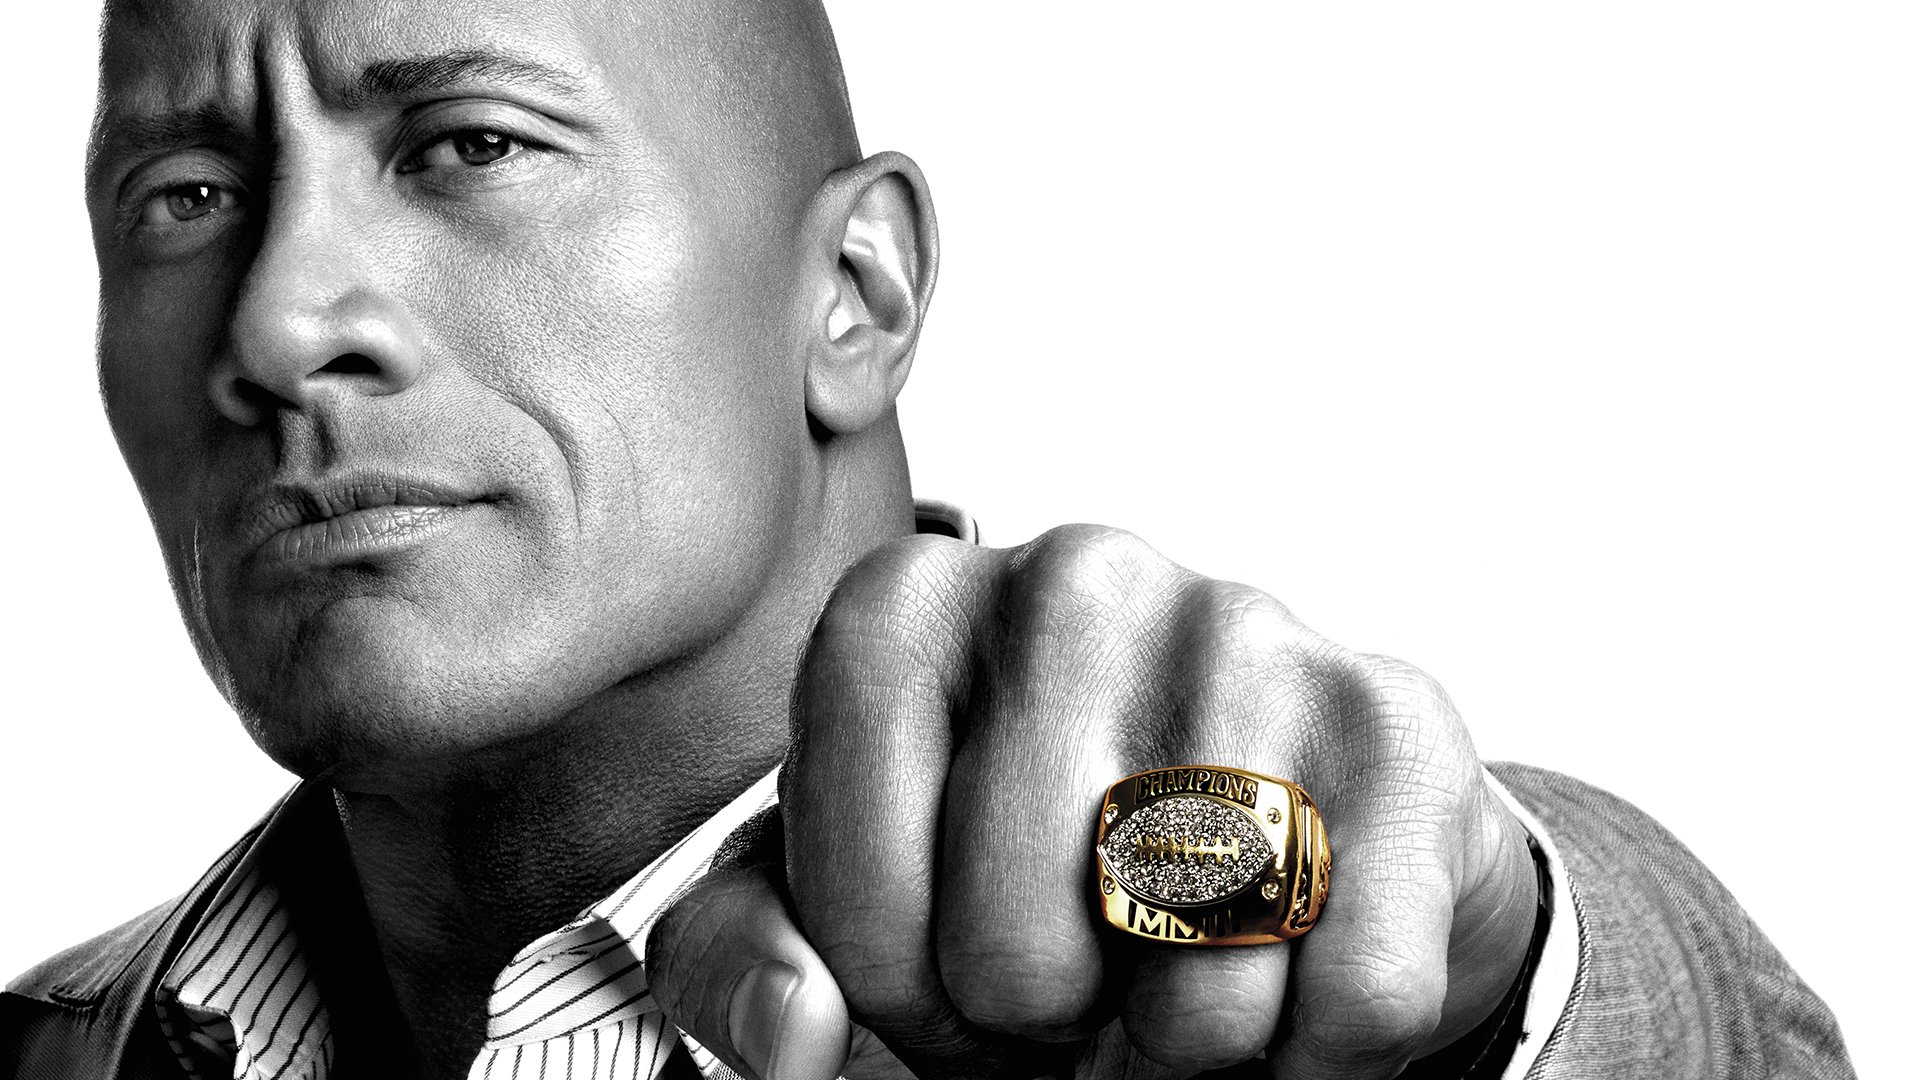 Ballers HD Wallpaper Background Image